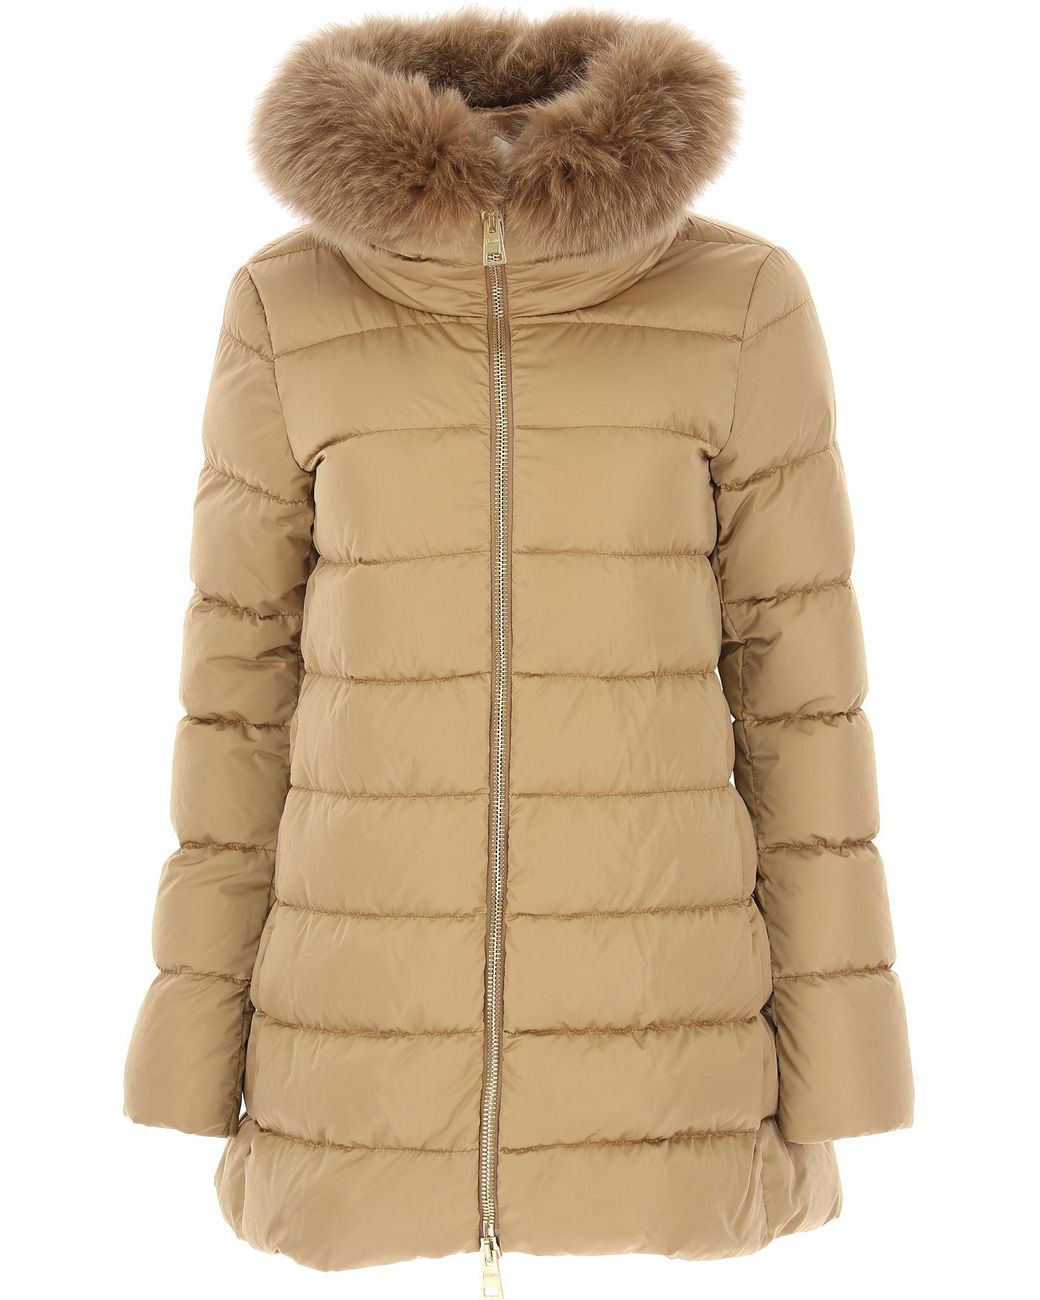 Herno Fur Down Jacket For Women in Natural - Lyst